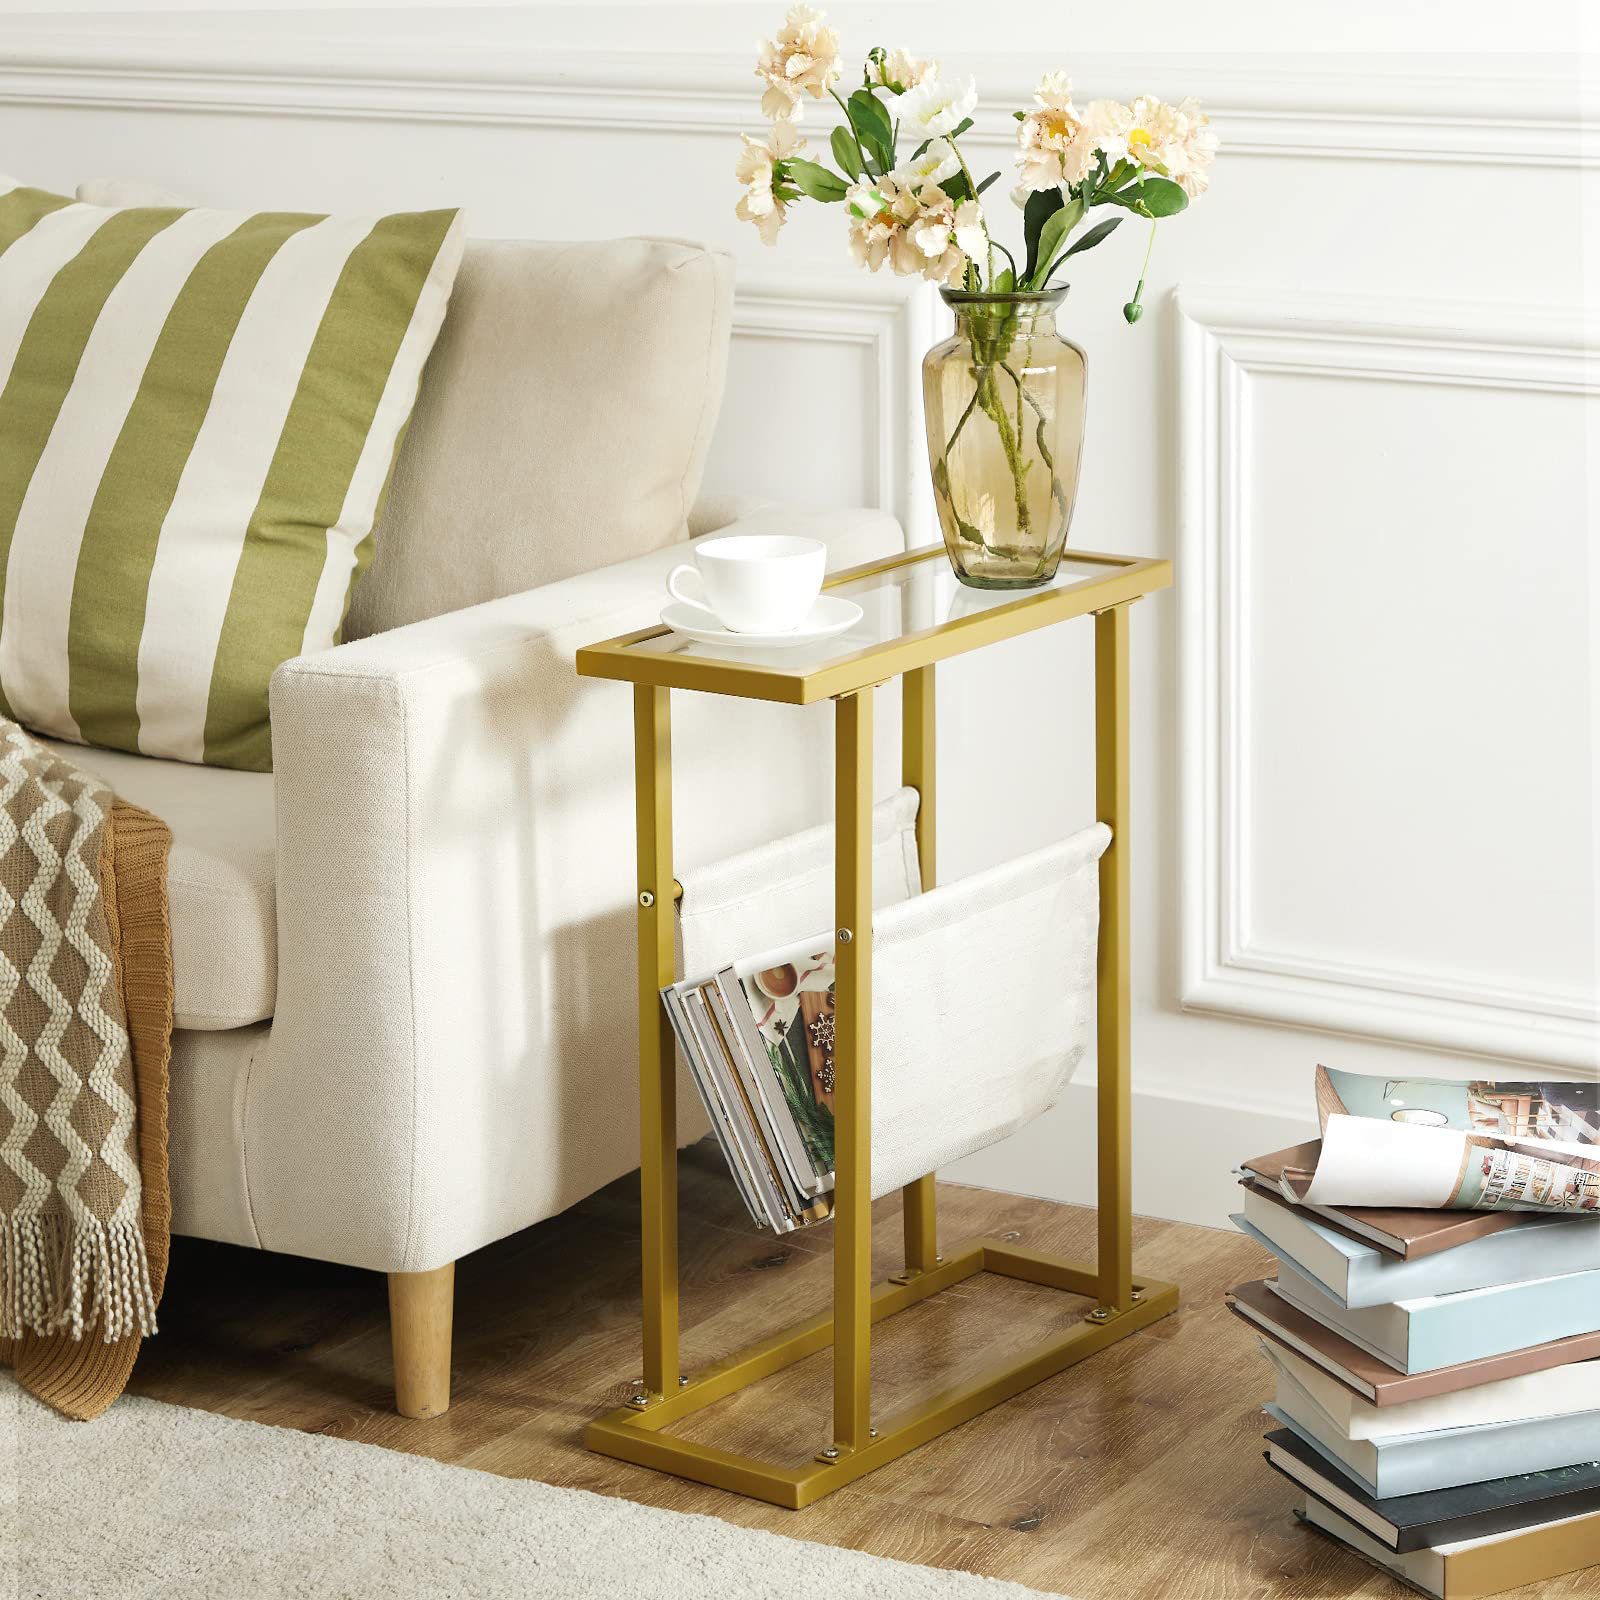 Fairmont Park Wachusett Side Table With Storage | Wayfair.co (View 13 of 15)